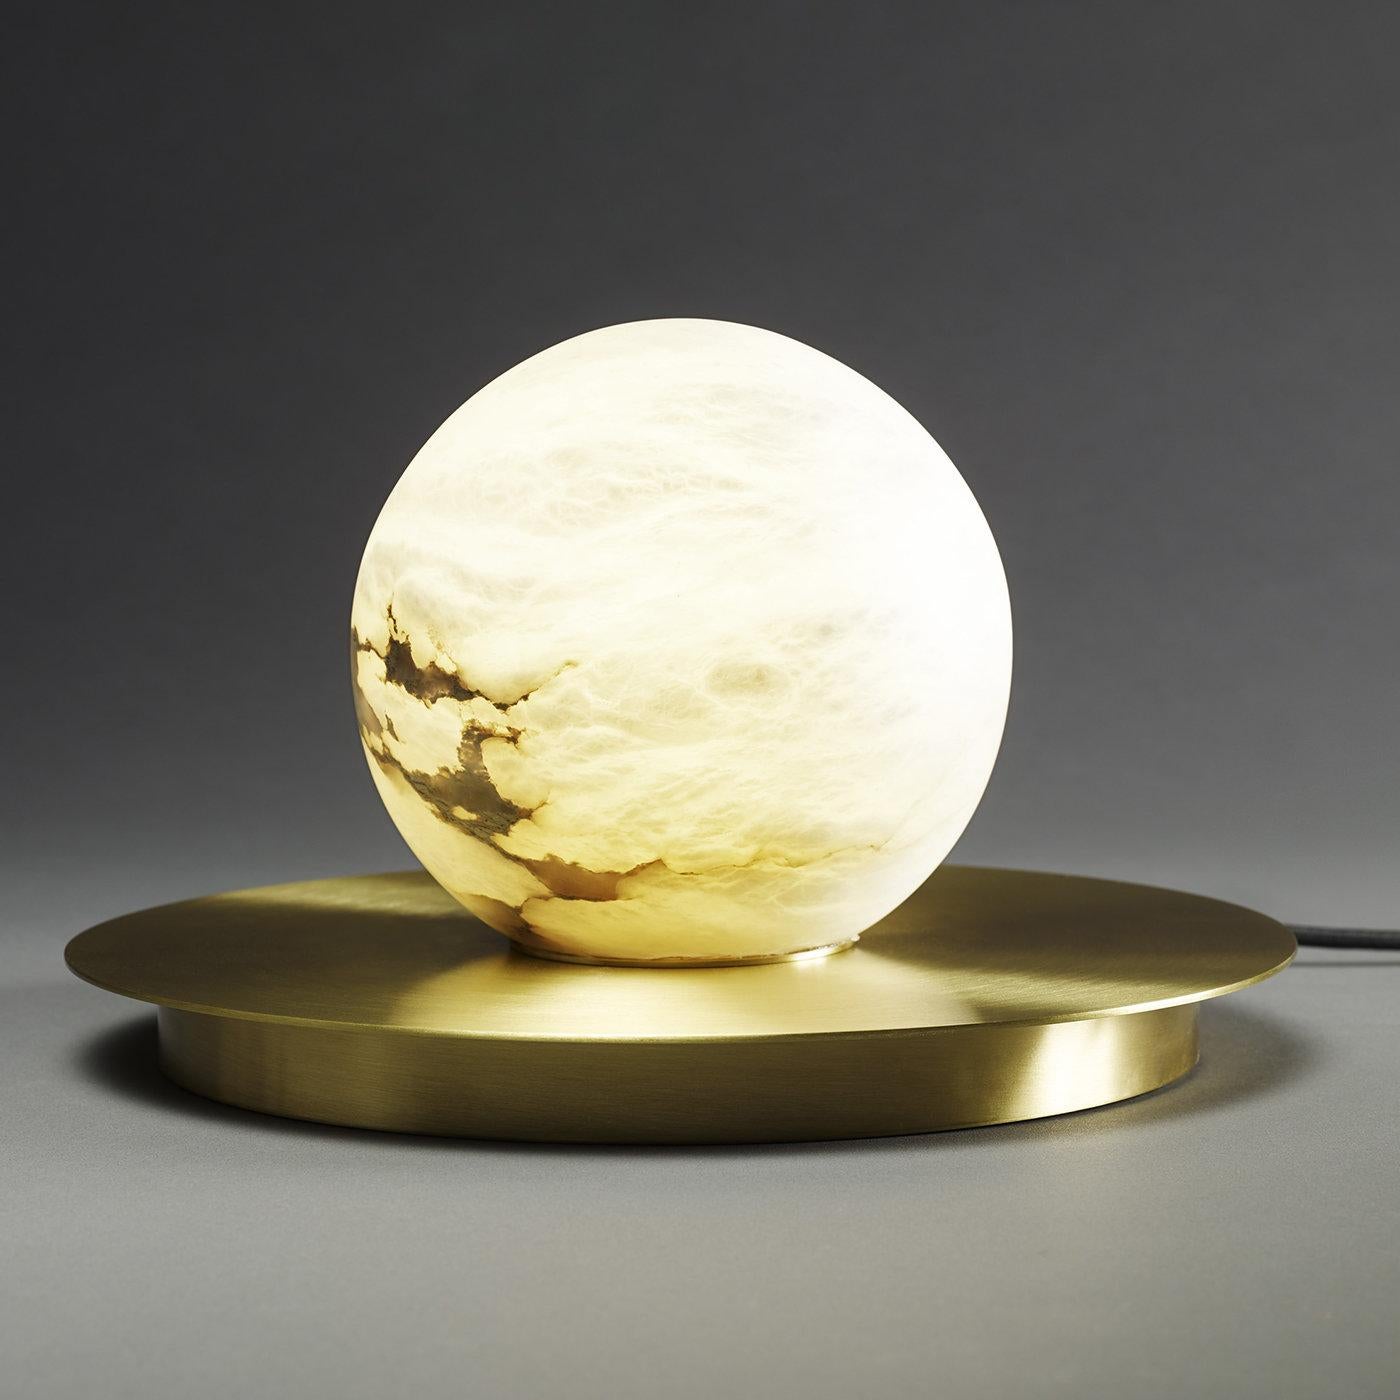 Translucent and warm, the surface of this elegant alabaster globe with stunning veining is lit from within, creating the magical effect of a full moon. The polished brass disk that serves as a base adds evocative reflections to this stunning table